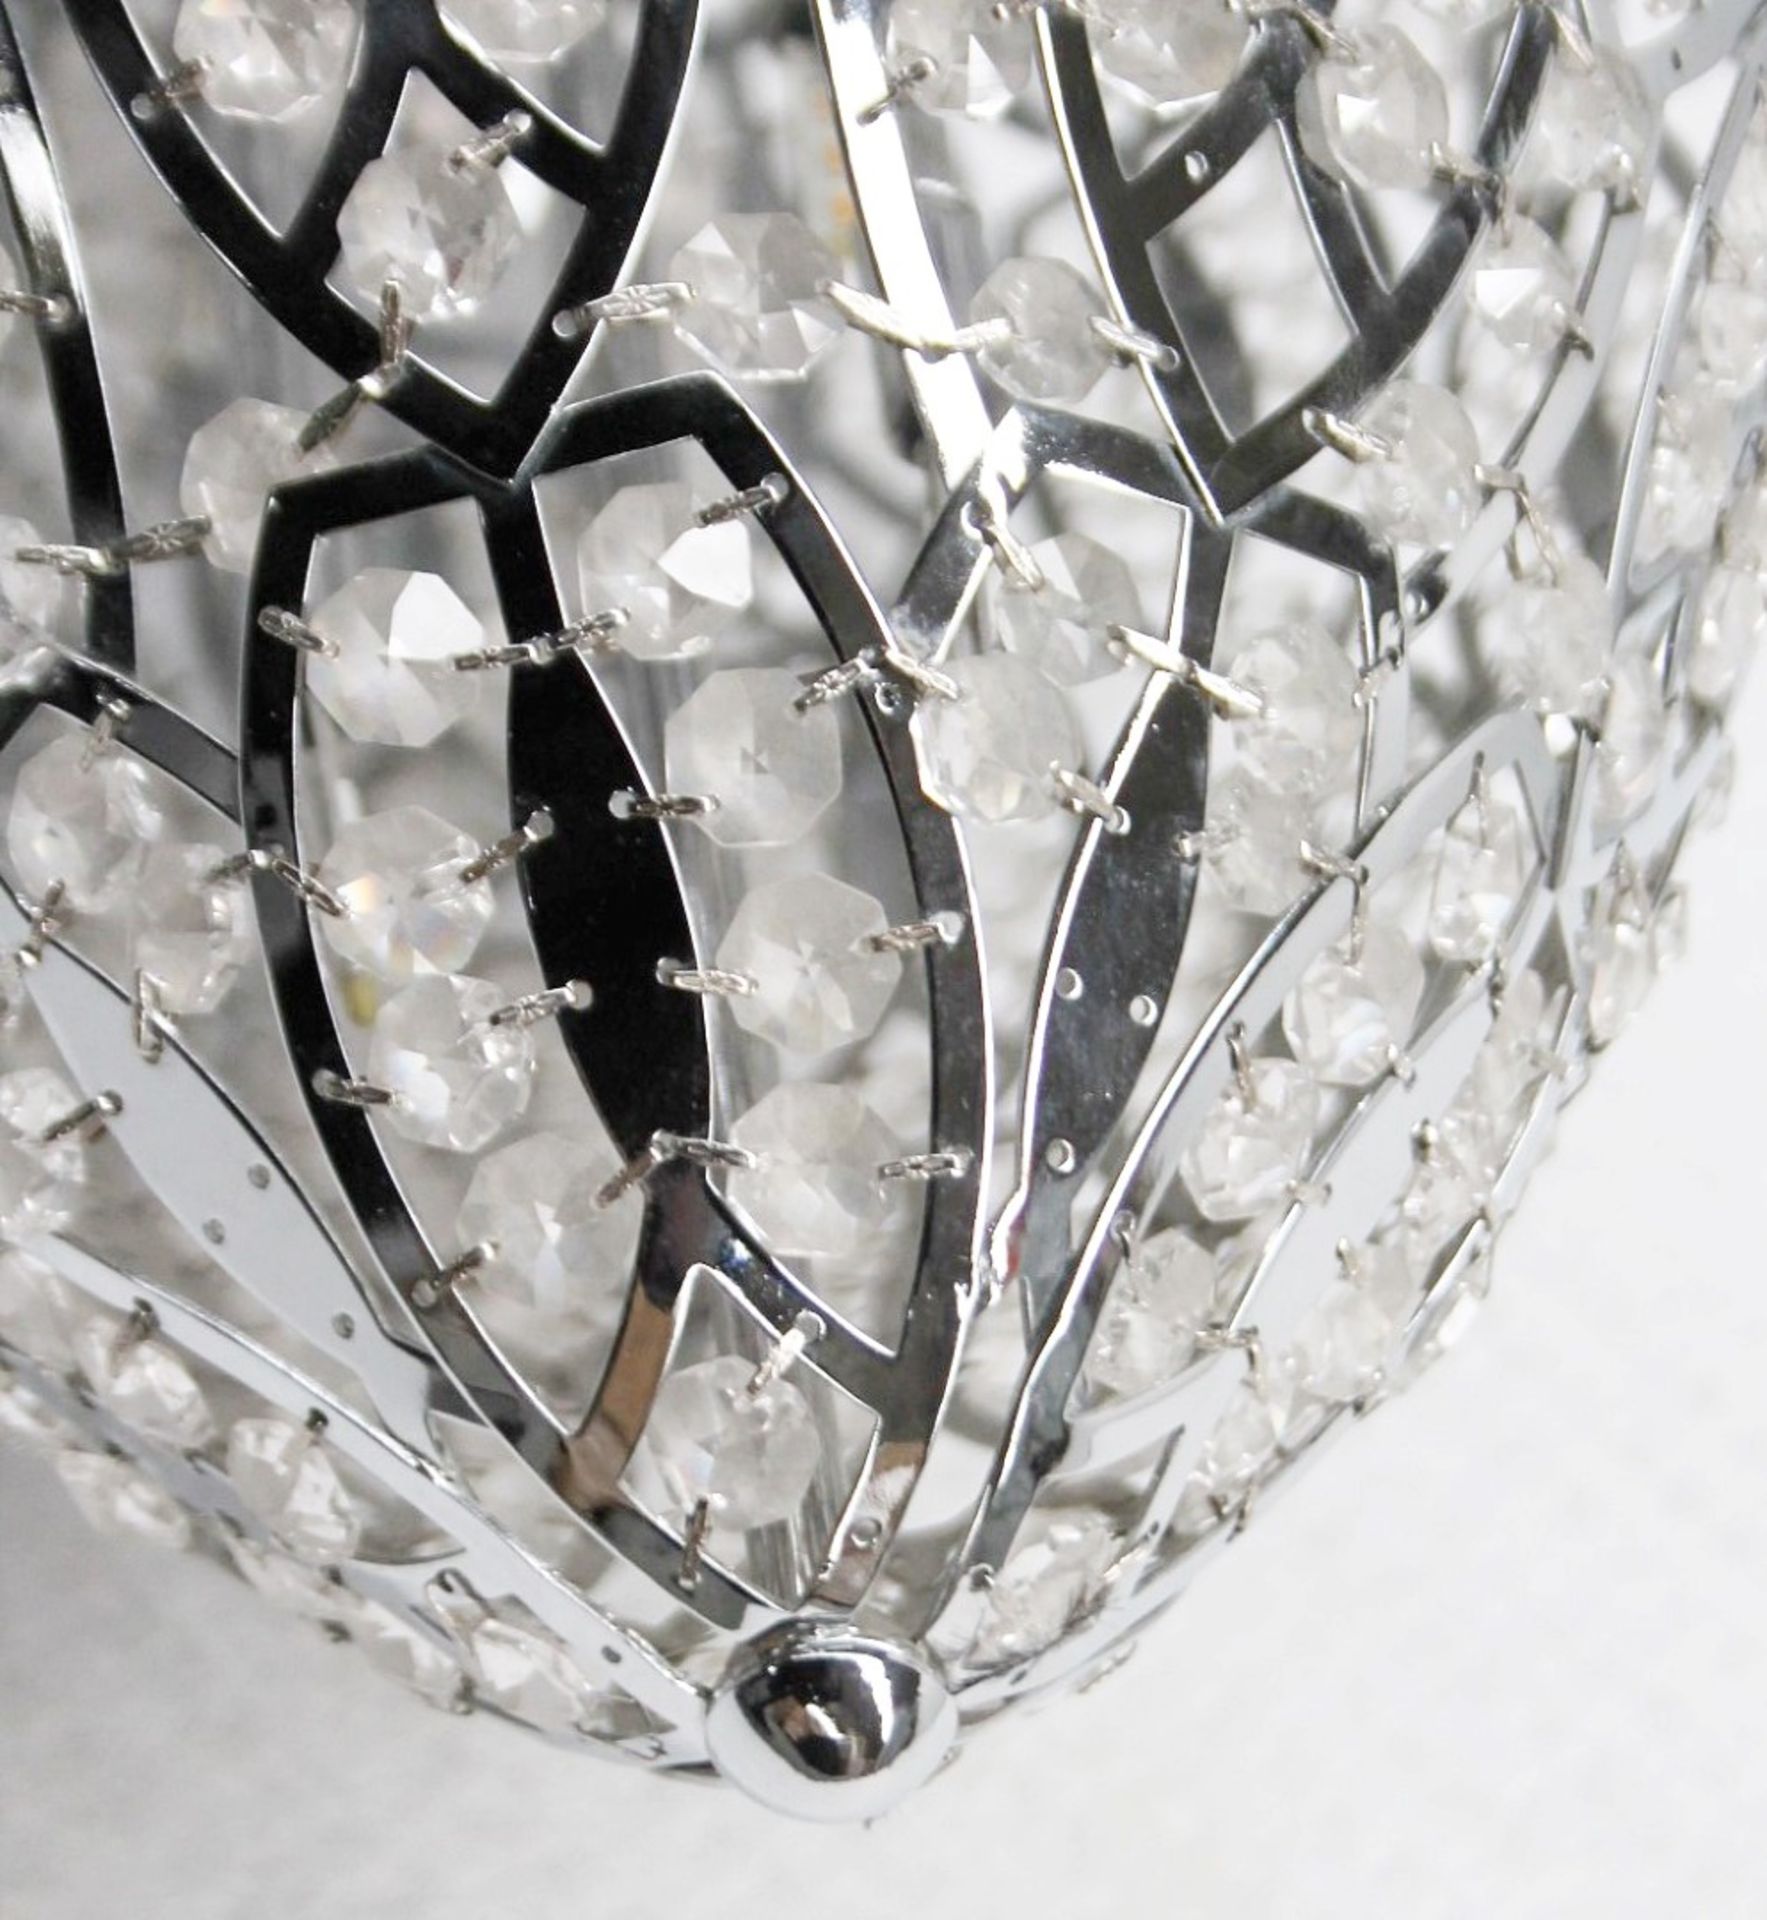 1 x High-end Italian LED Egg-Shaped Light Fitting Encrusted In Premium ASFOUR Crystal - RRP £4,000 - Image 5 of 9